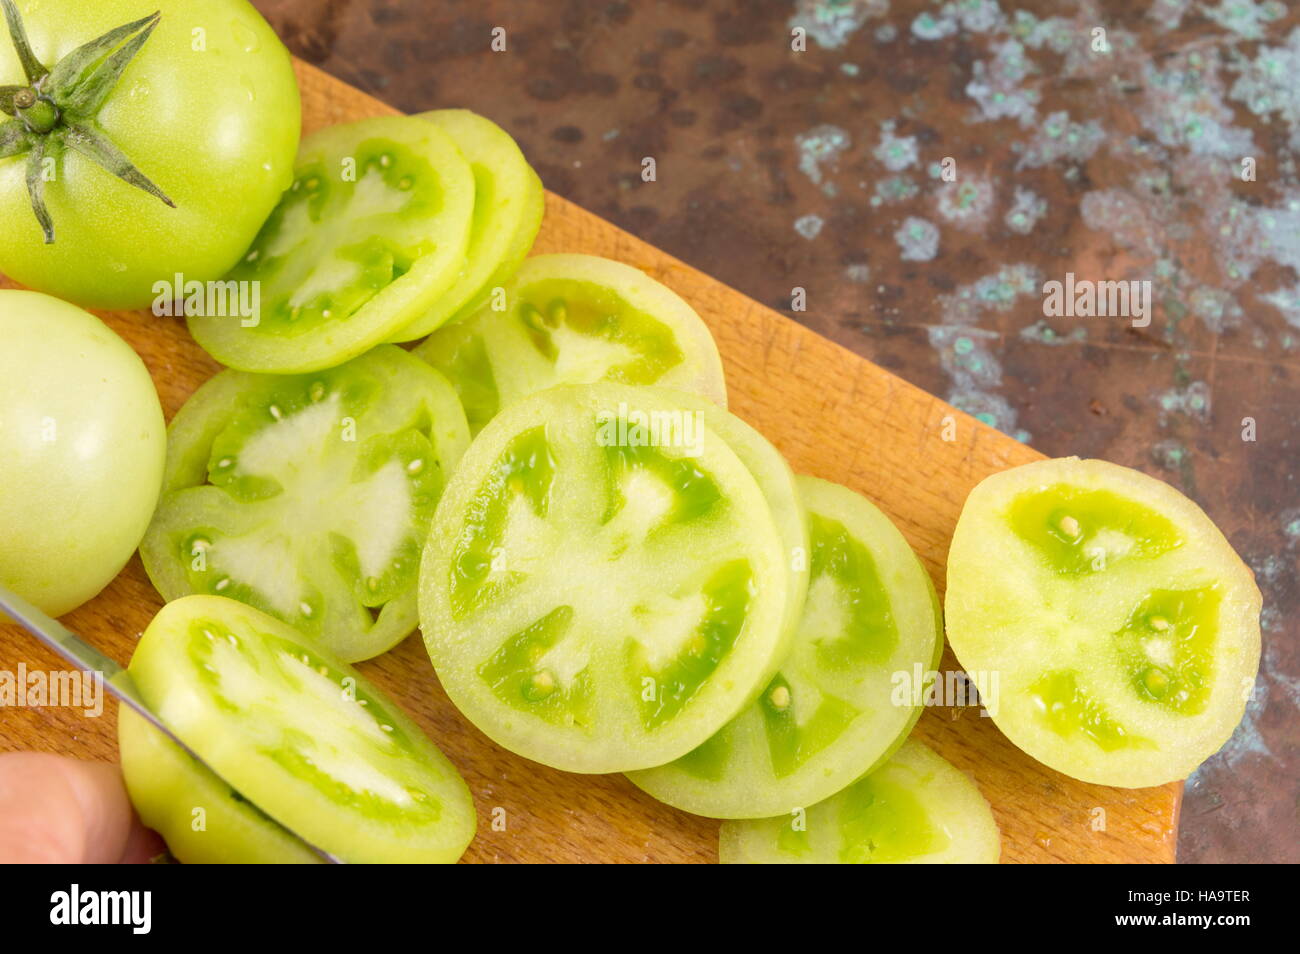 hand slicing green tomatoes on a wooden cutting board Stock Photo